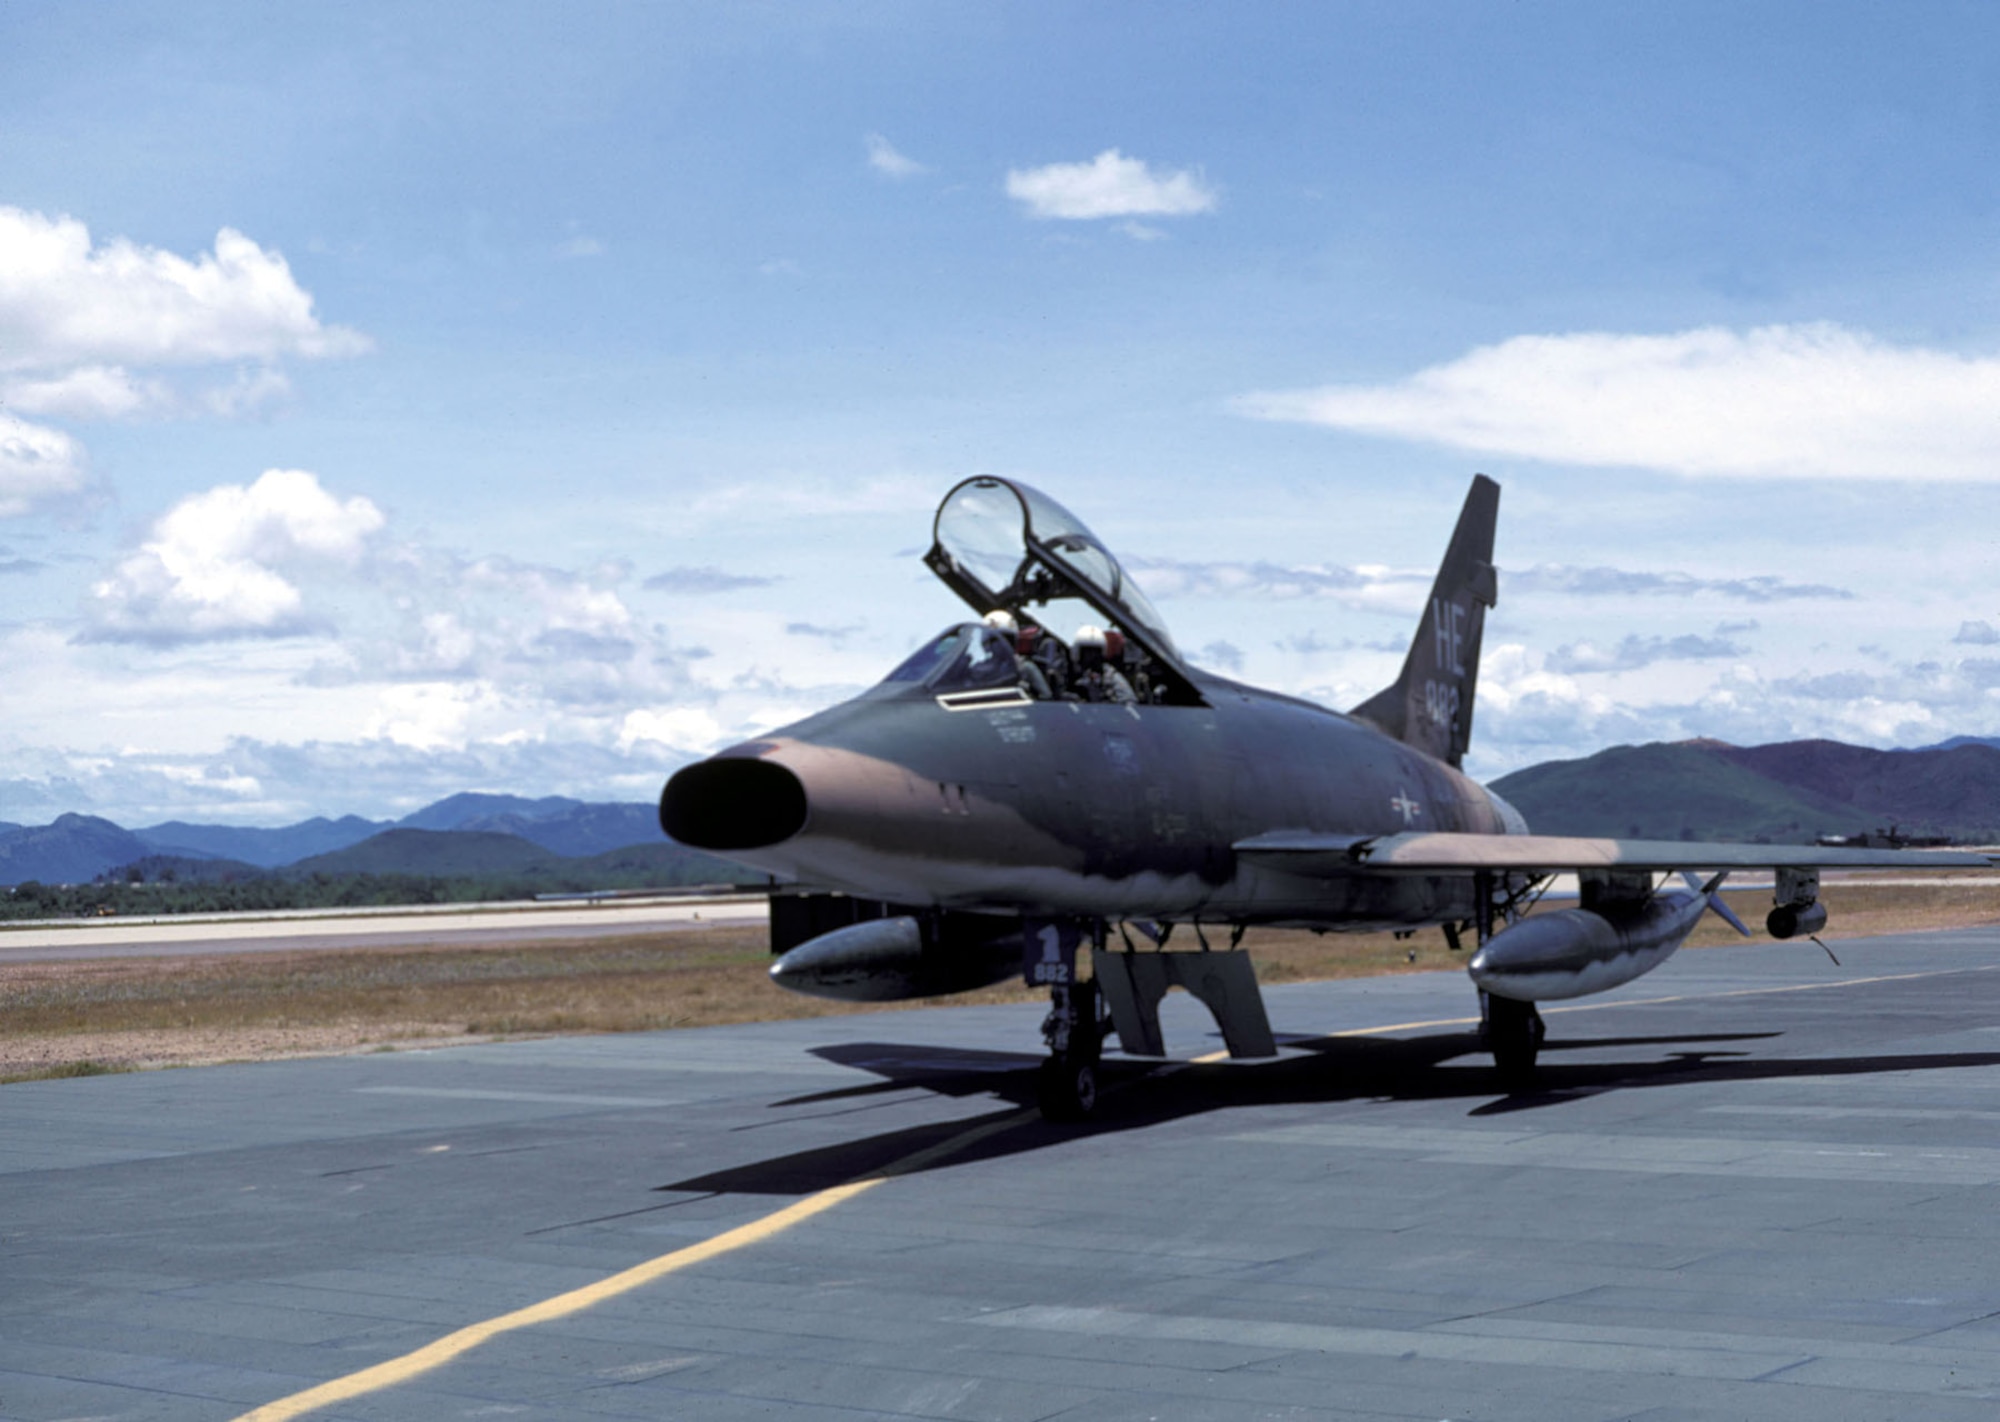 A Misty FAC F-100F used by Det 1, 612th Tactical Fighter Squadron, 37th Tactical Fighter Wing at Phu Cat AB. A Misty FAC F-100F is on display in the Southeast Asia War Gallery at the National Museum of the U.S. Air Force. (U.S. Air Force photo)